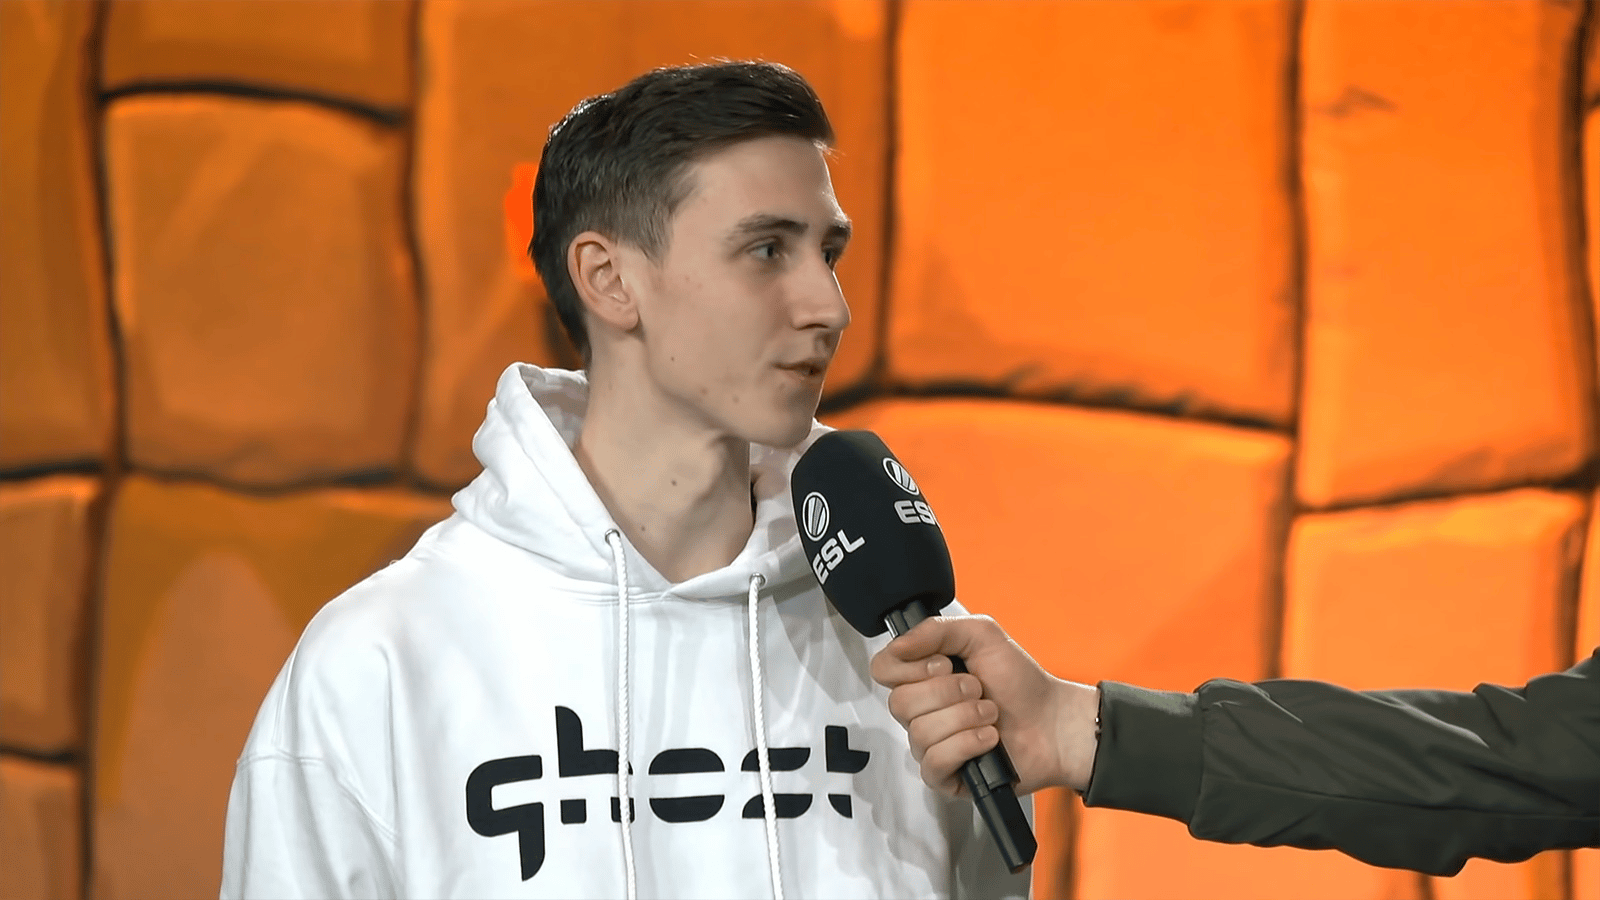 Bizzle being interviewed while on Ghost Gaming